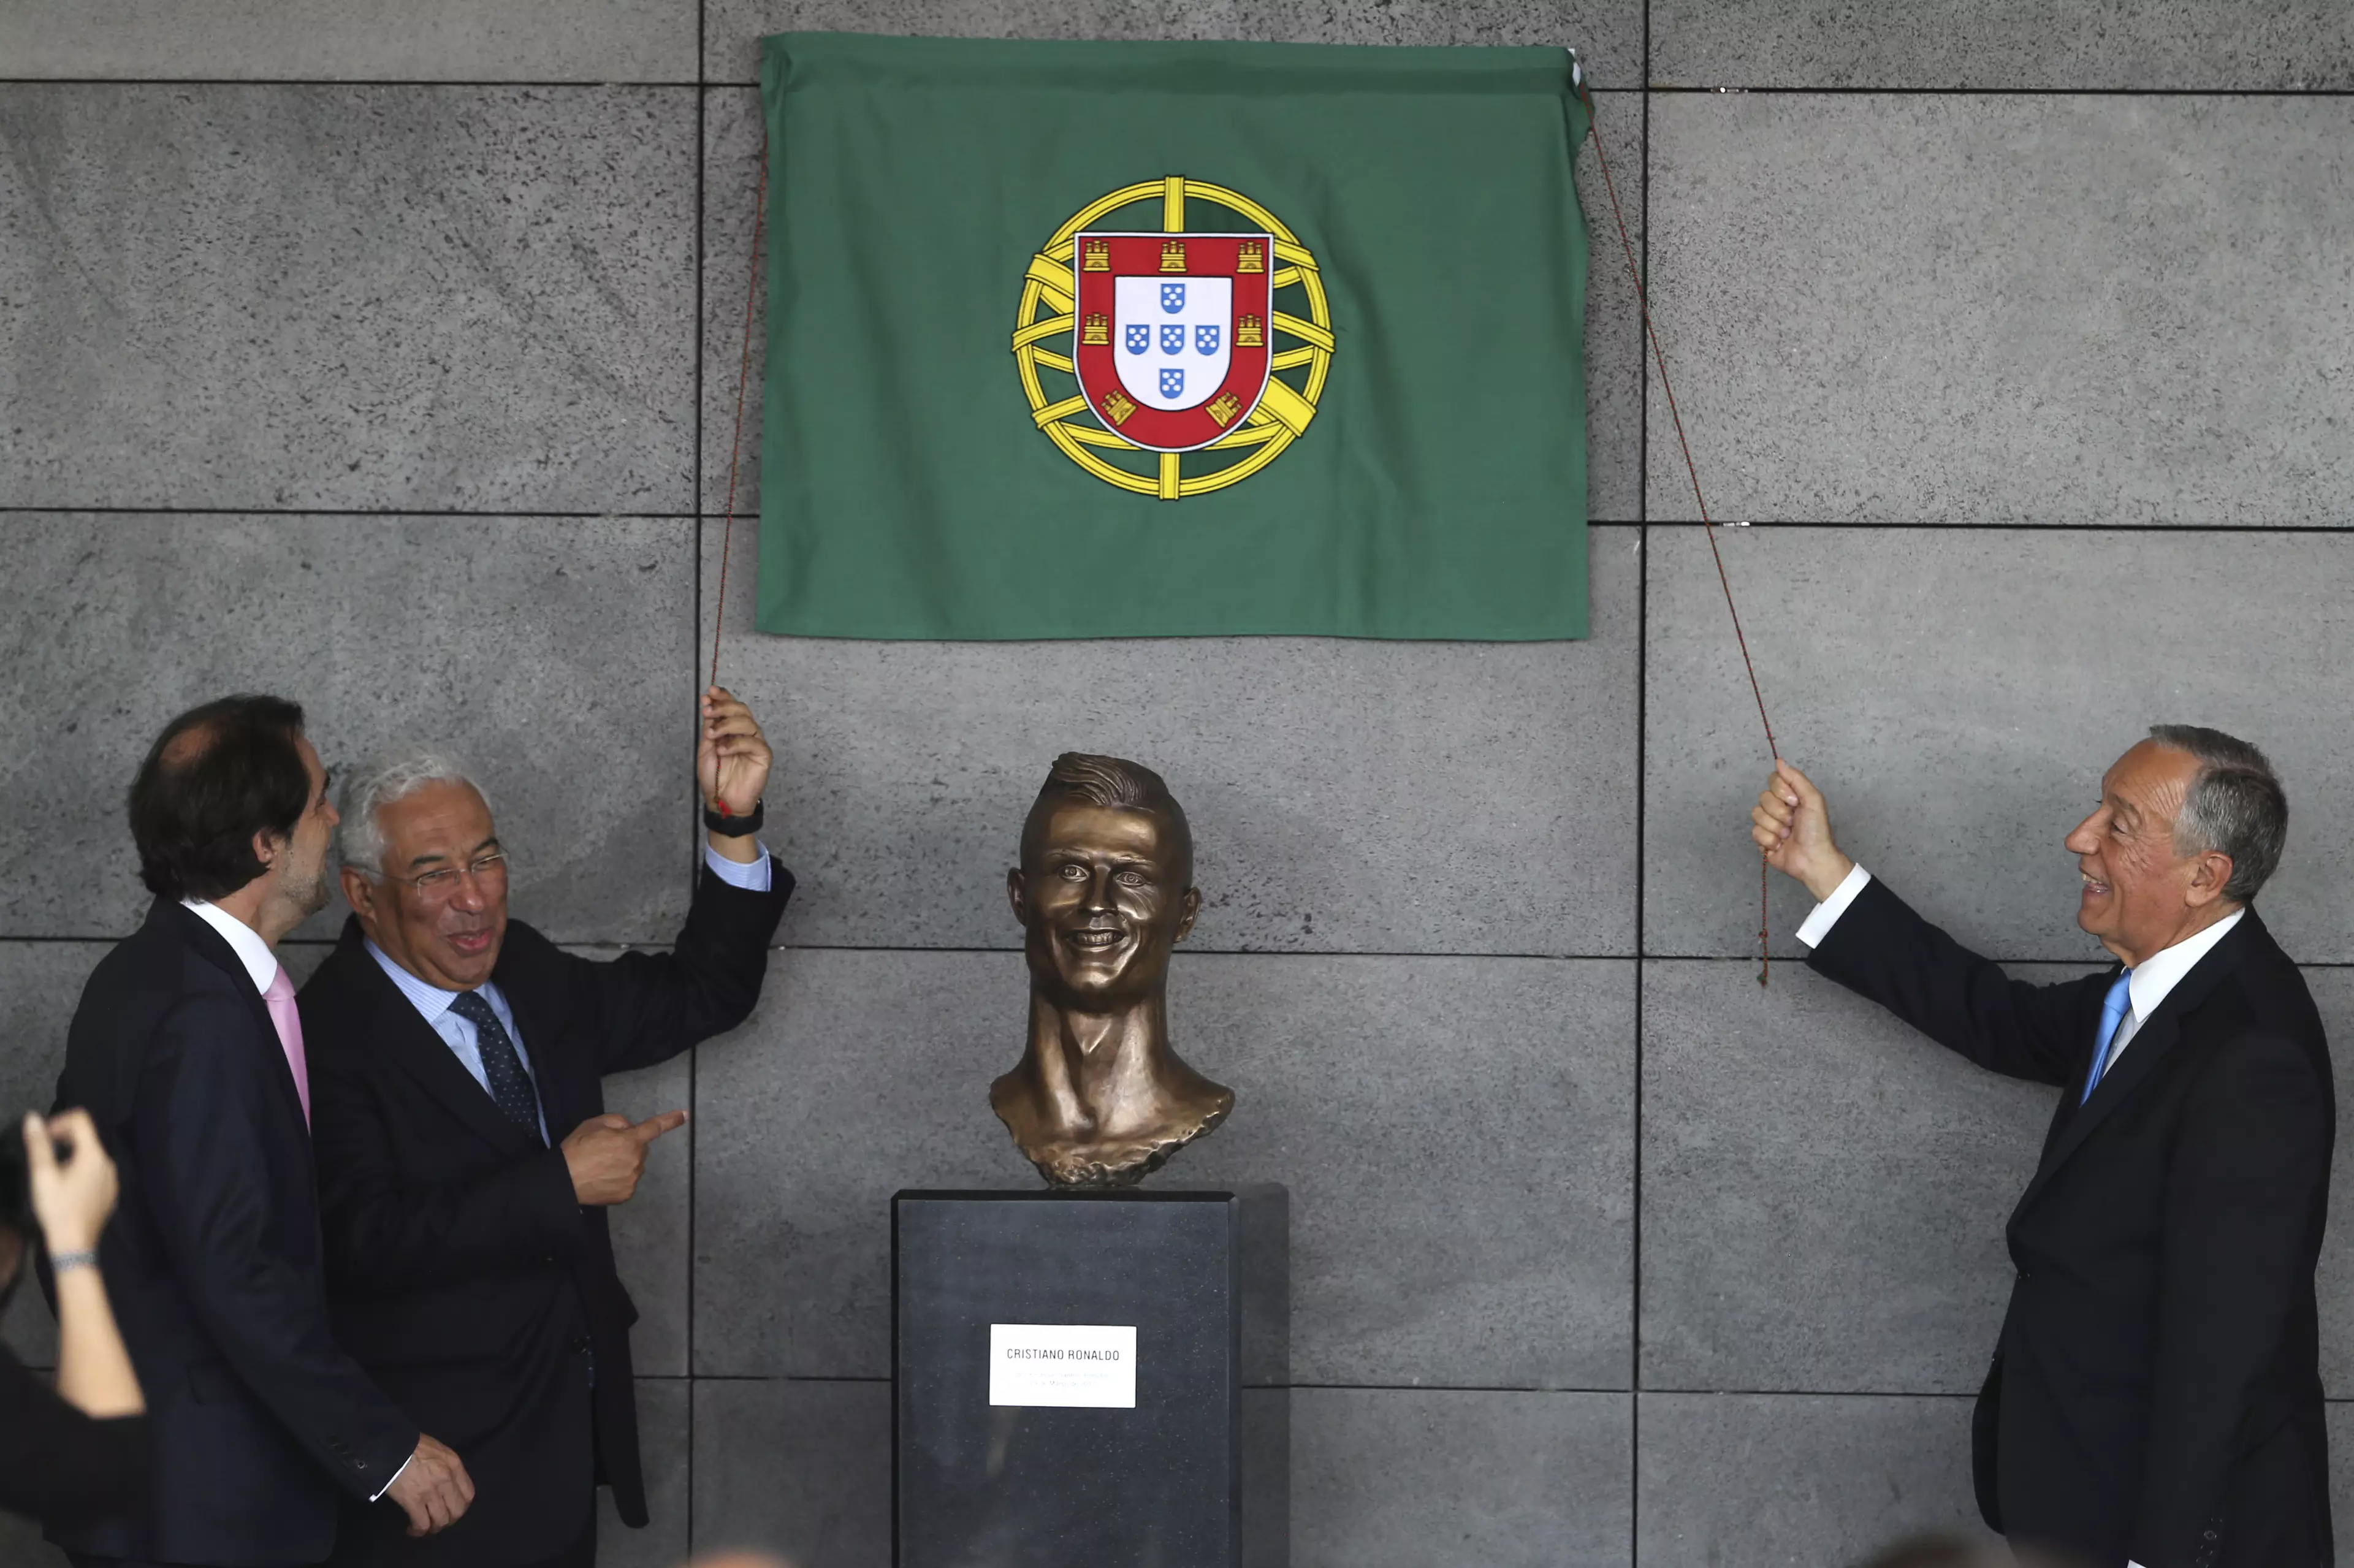 Cristiano Ronaldo's bust back in March started a trend of hilariously bad football statues. Image: PA